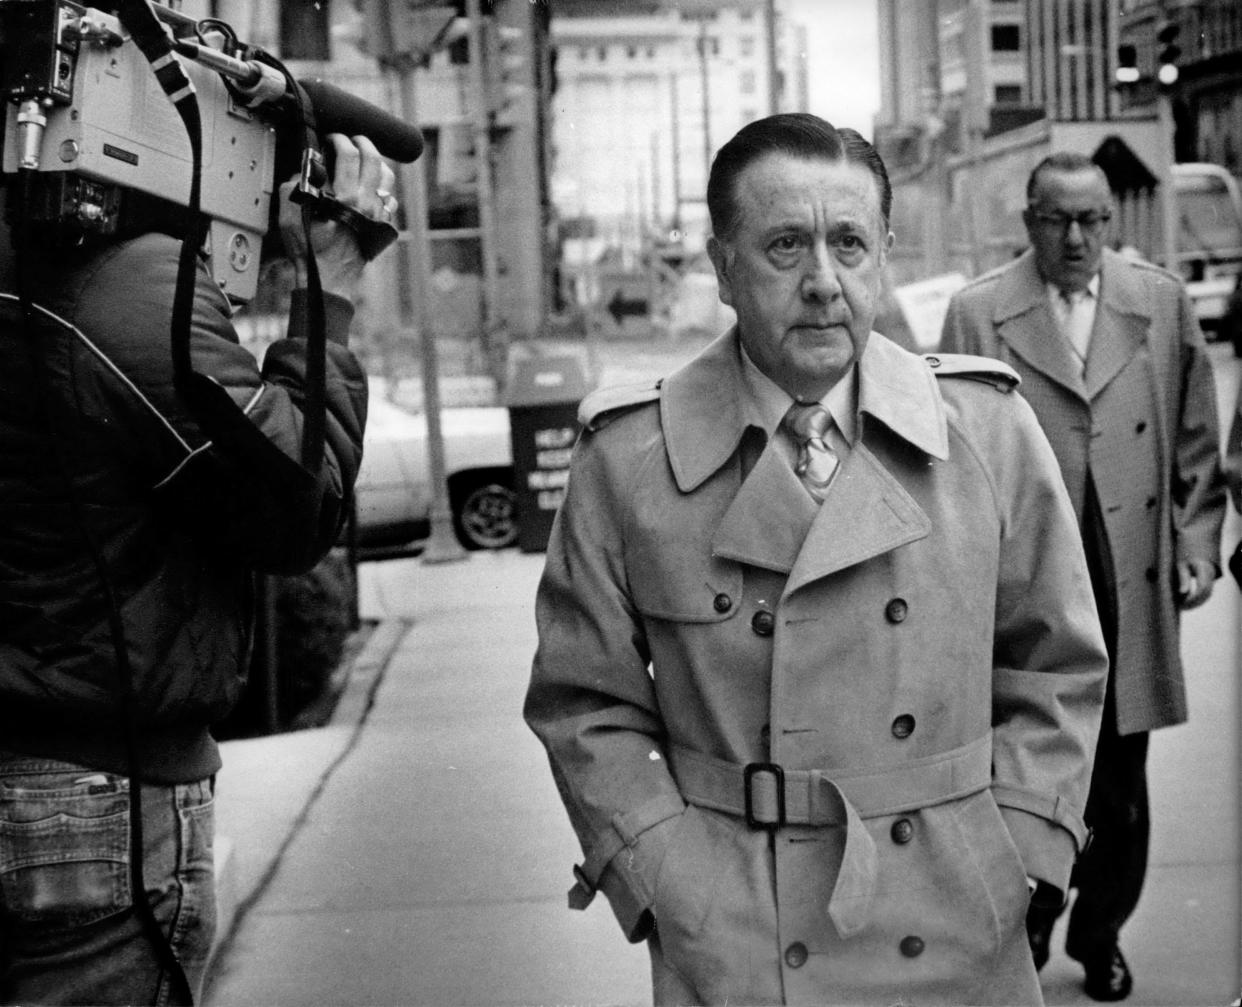 Frank P. Balistrieri arrives at the Federal Building in Milwaukee on April 9, 1984, to hear the verdict in his extortion trial.